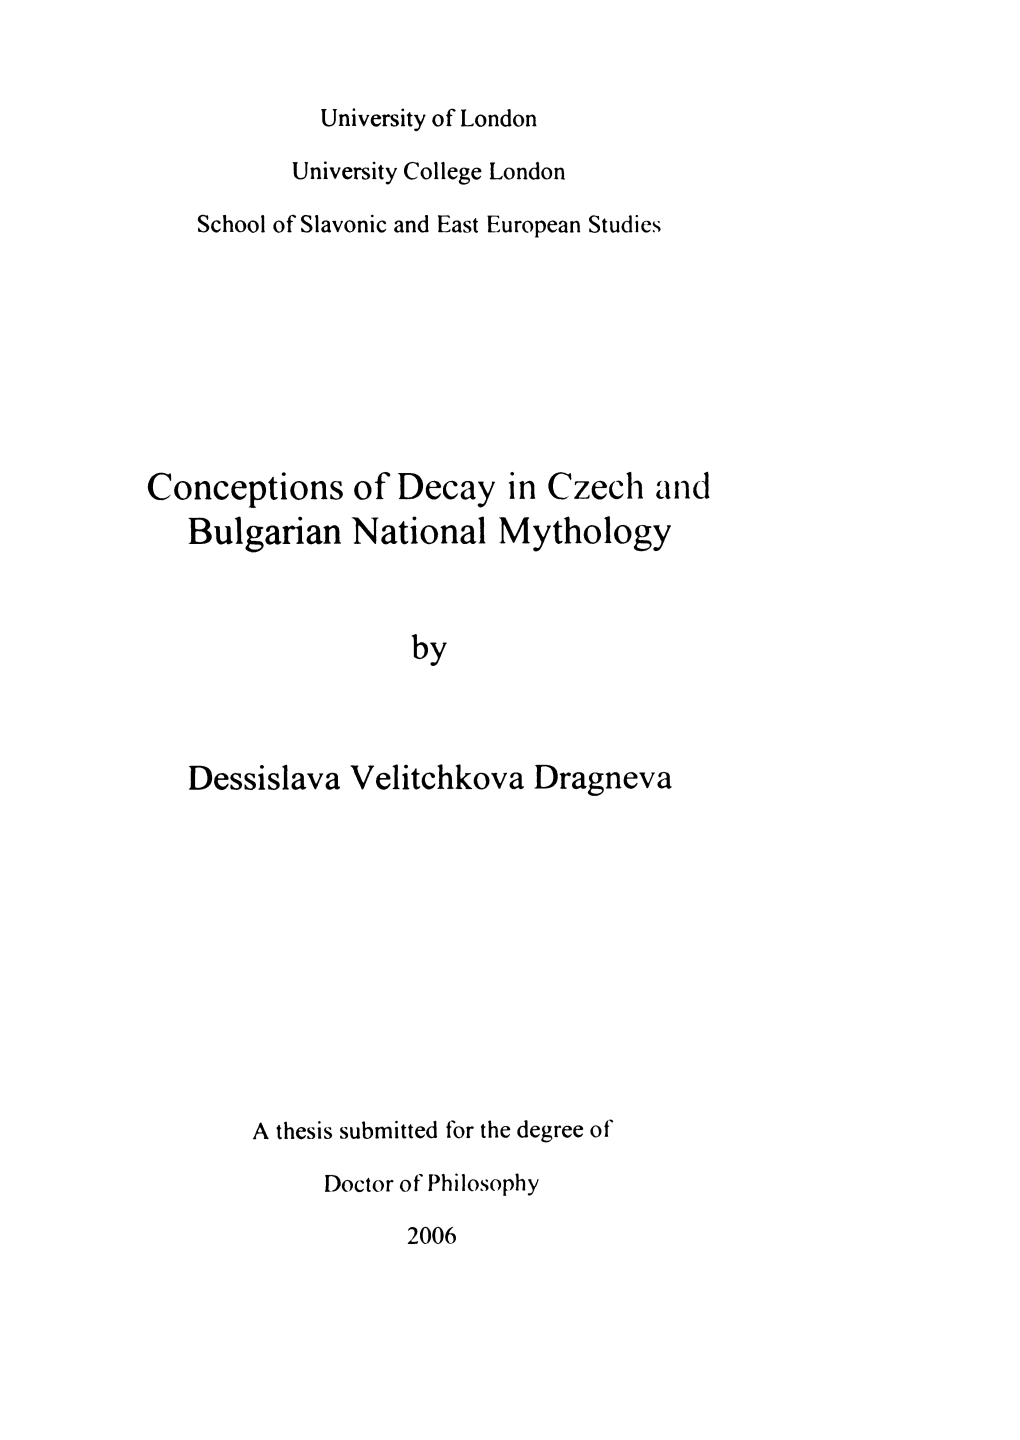 Conceptions of Decay in Czech and Bulgarian National Mythology